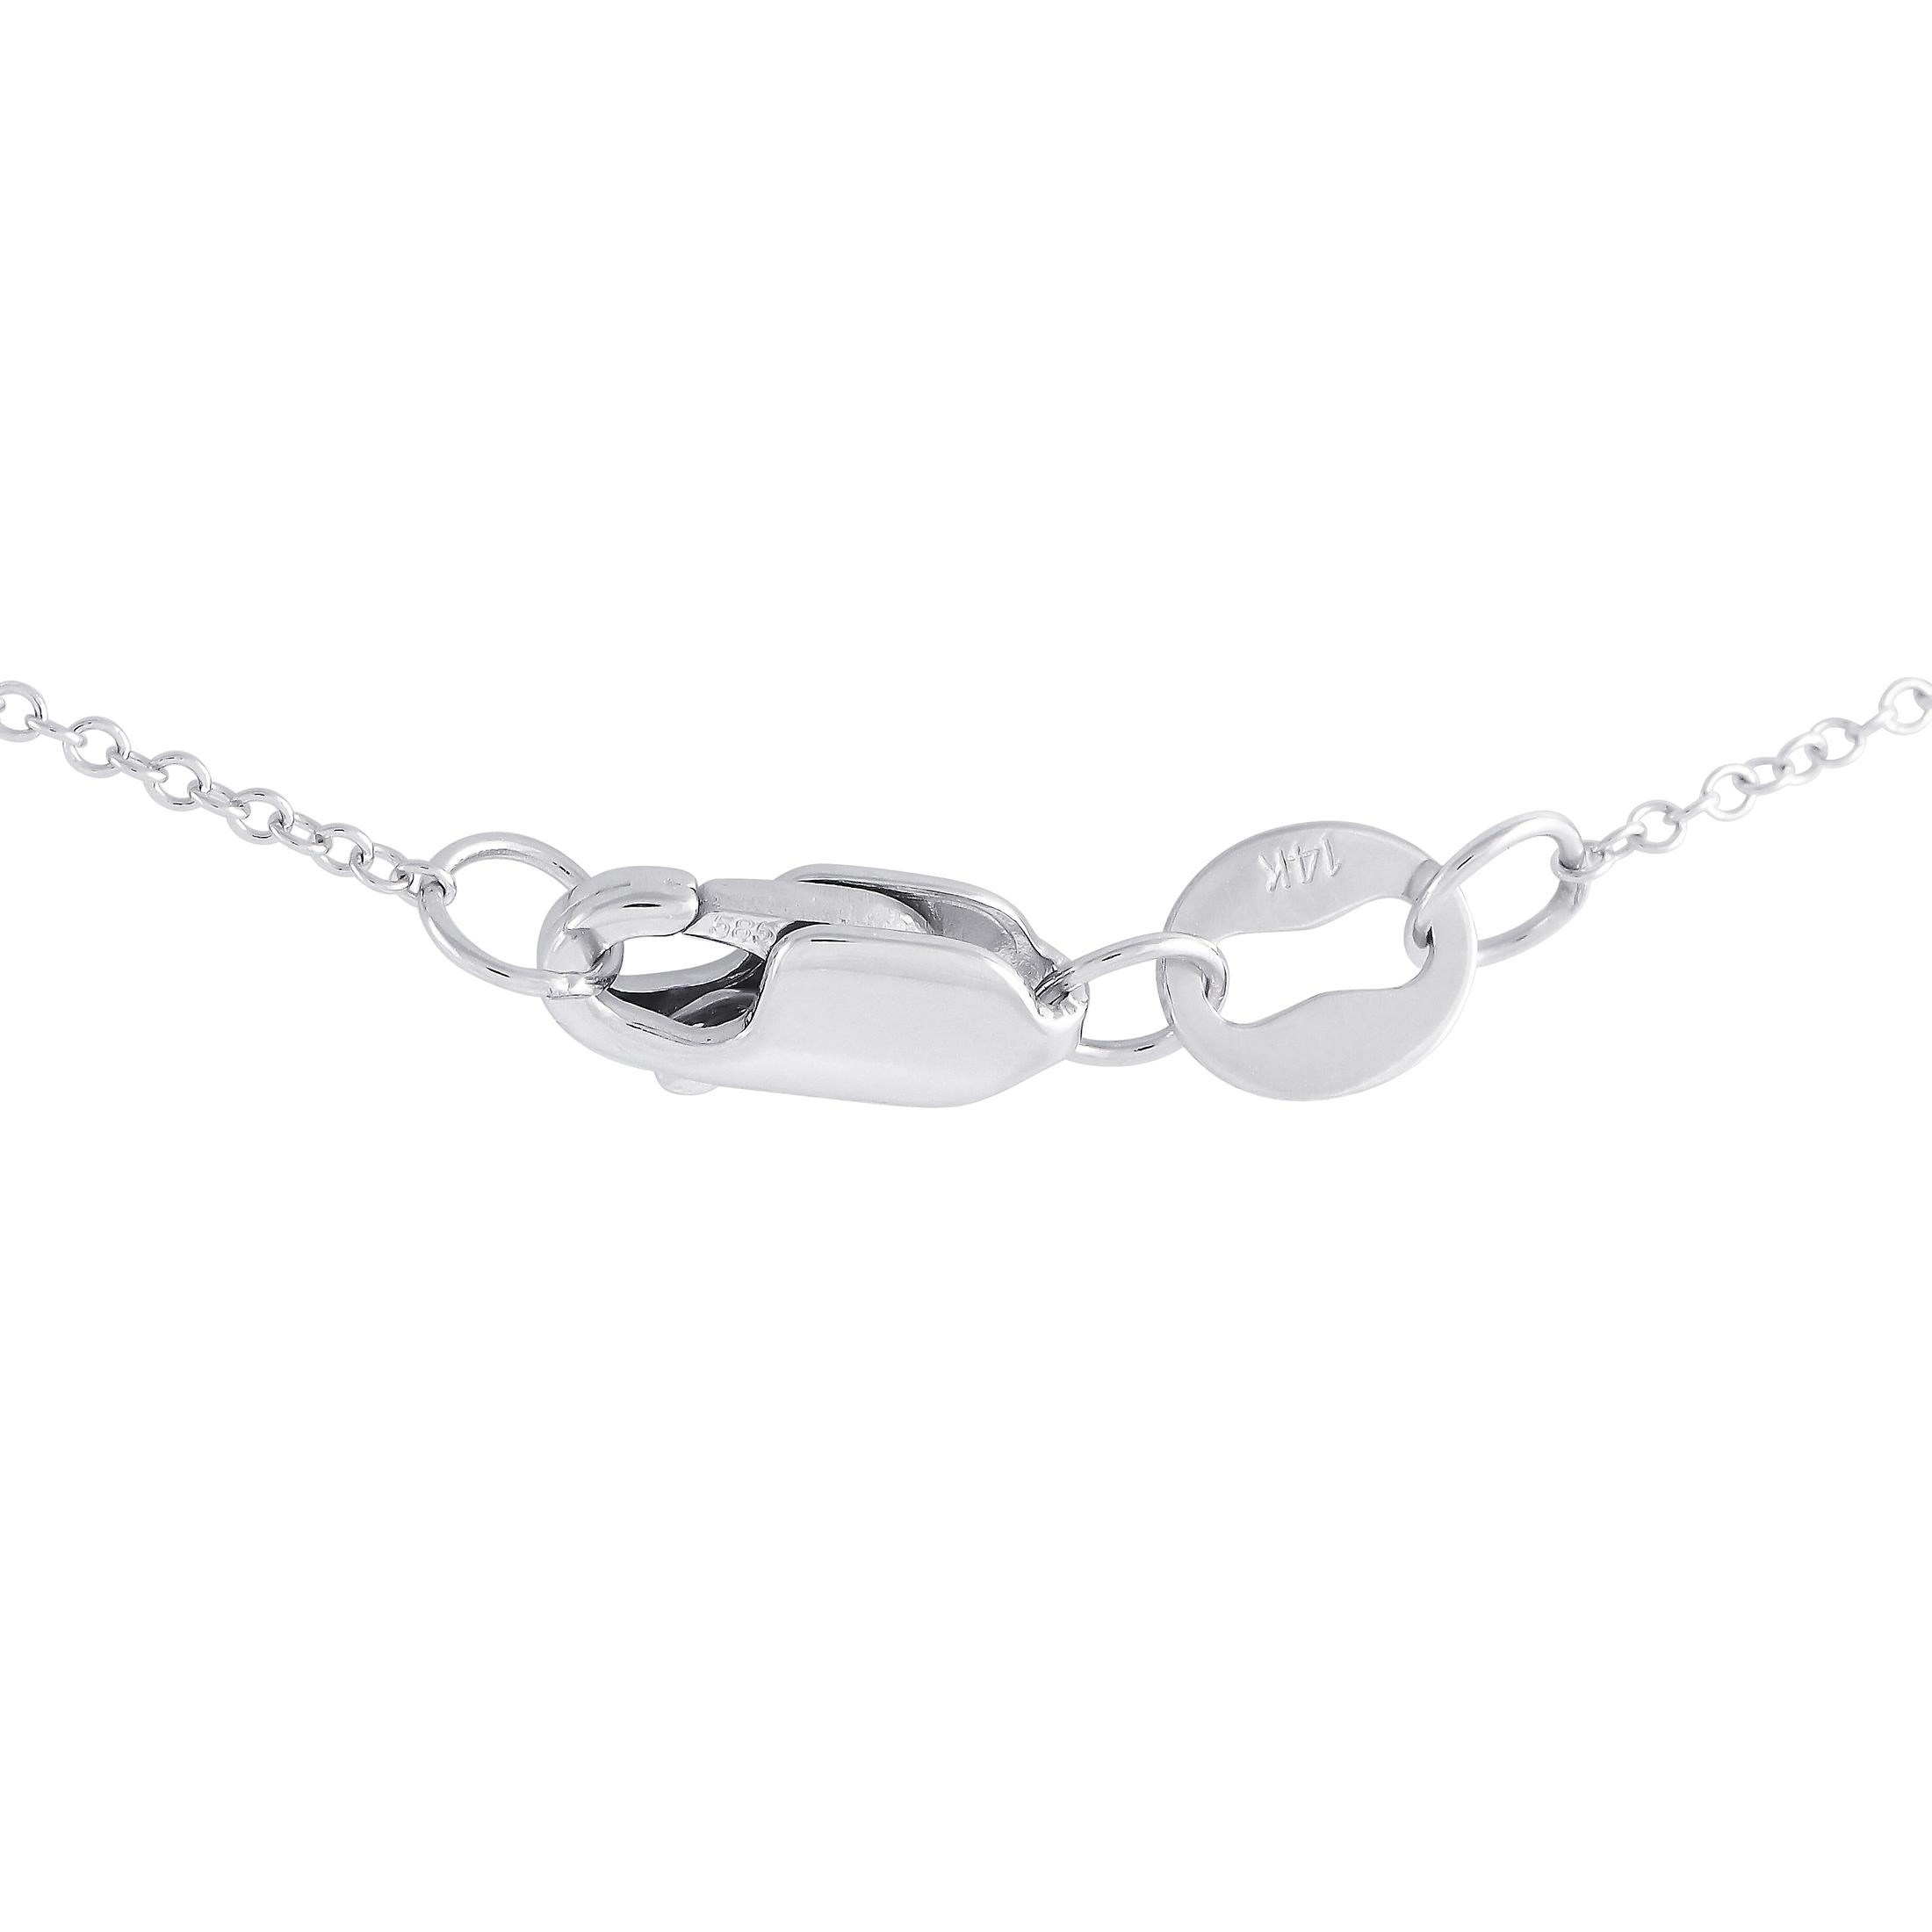 An array of scintillating diamonds with a total weight of 0.25 carats ensure this understated 14K White Gold necklace always makes a statement. Suspended from a 16\u201d chain, this piece features a stunning circular pendant measuring 0.45\u201d